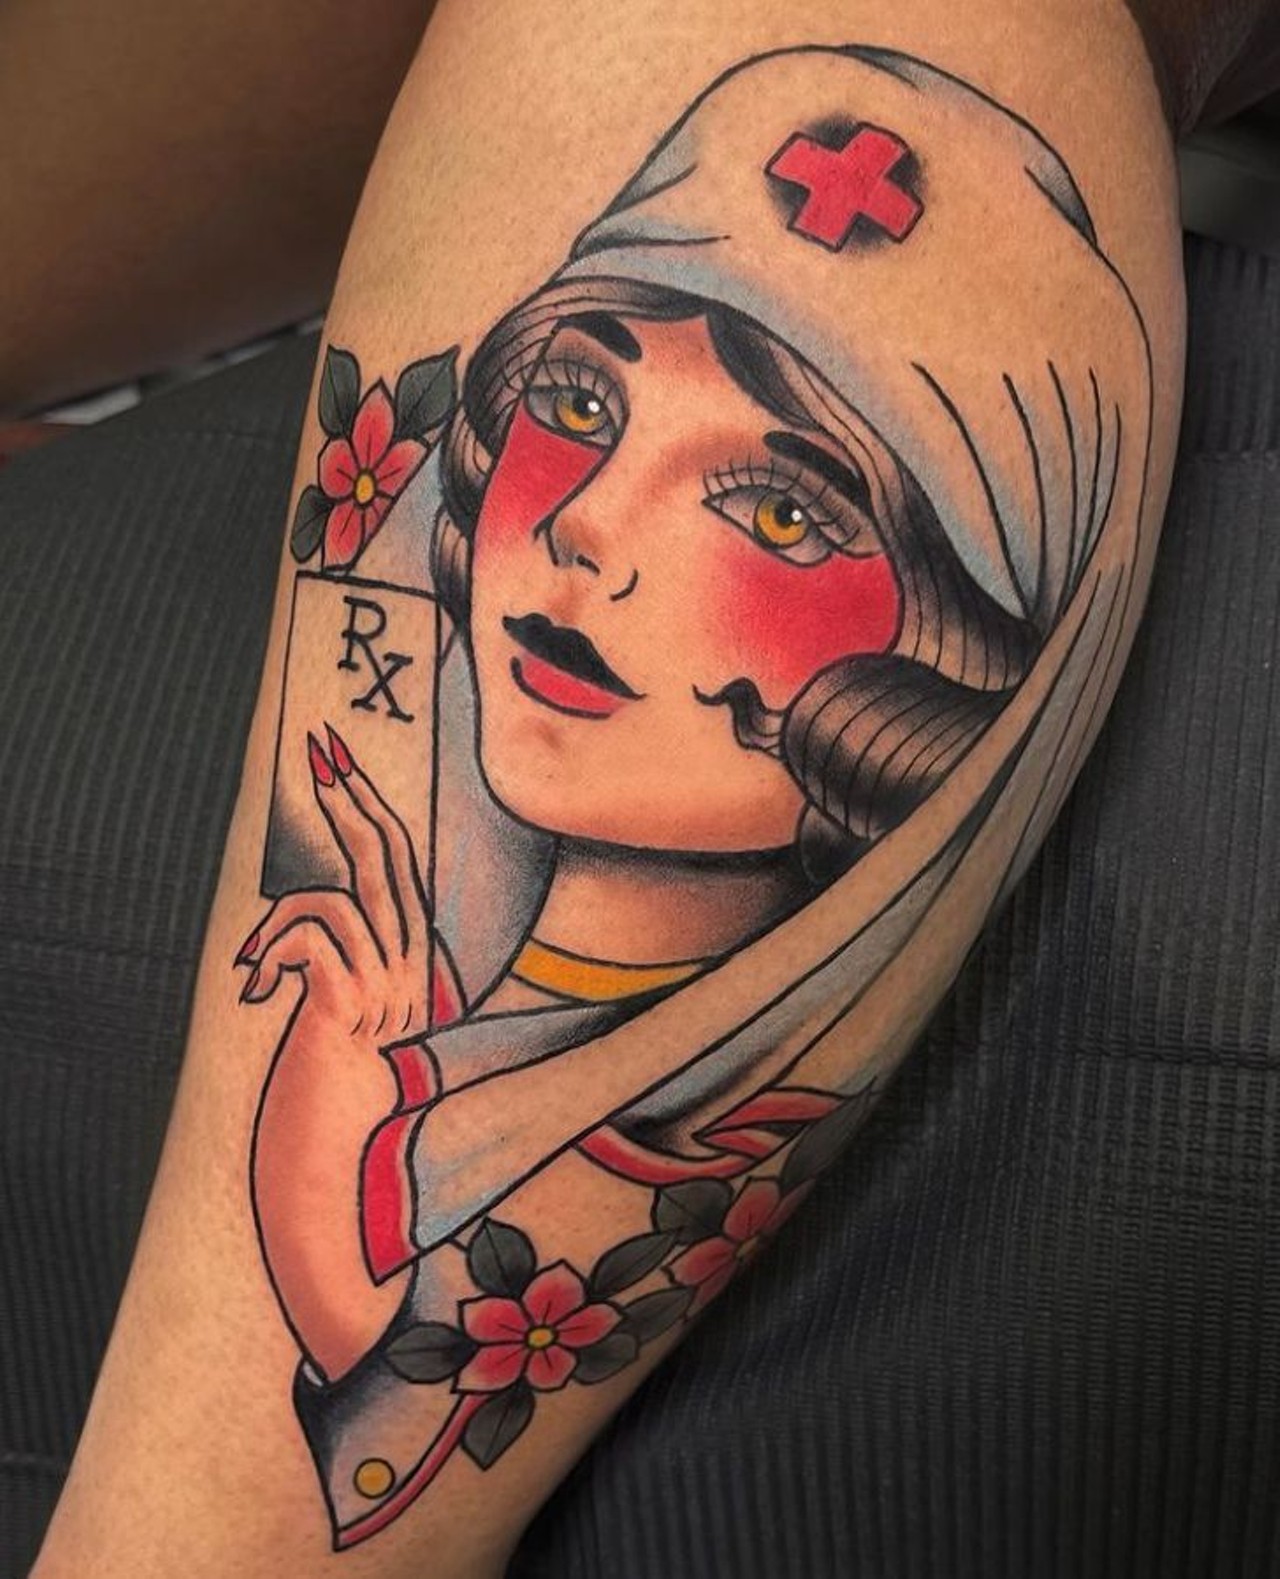 Mina Kate 
Pride &#145;N&#146; Envy Tattoos
3166 Bill Beck Blvd., Kissimmee, 407- 483- 4893
Check out Mina Kate&#146;s work for all neo-traditional and color needs. Her work is amongst some of the most popular at Pride &#145;N&#146; Envy Tattoos. 
Photo via minaxkate/Instagram